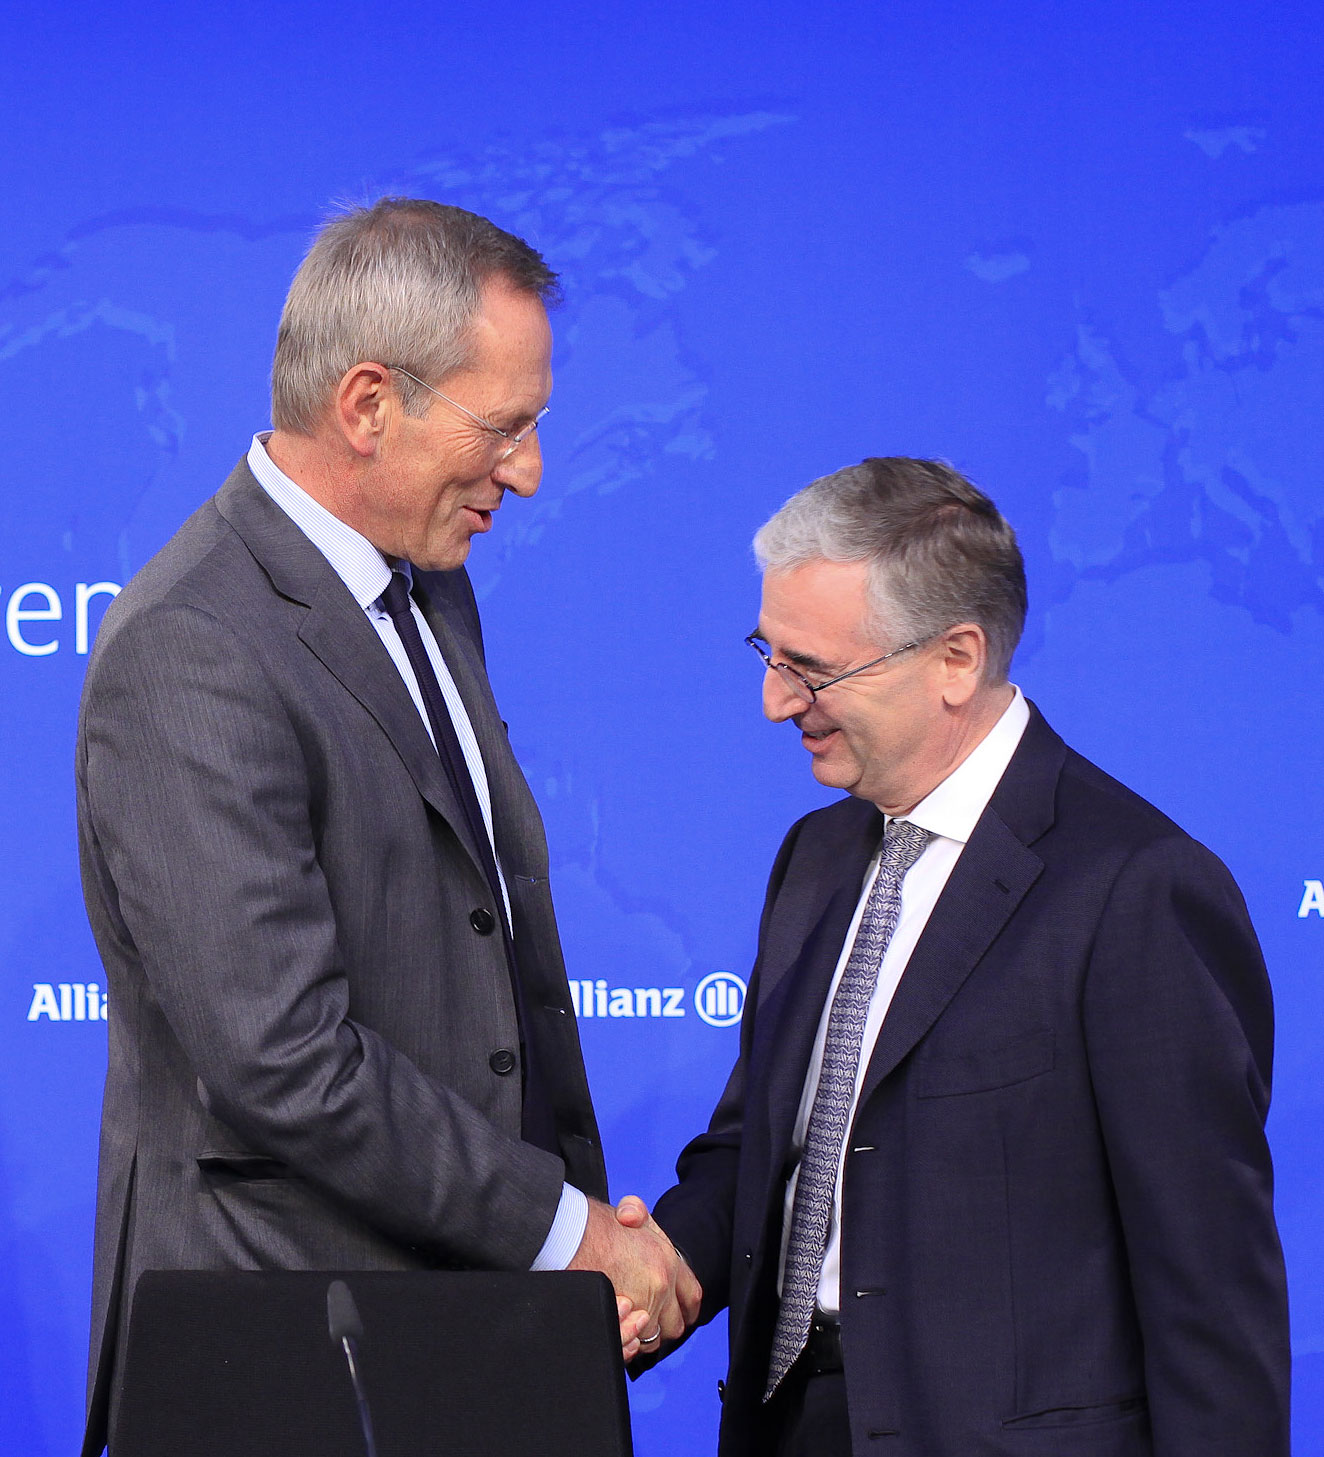 Allianz SE board member Paul Achleitner and CEO Michael Diekmann (from right)